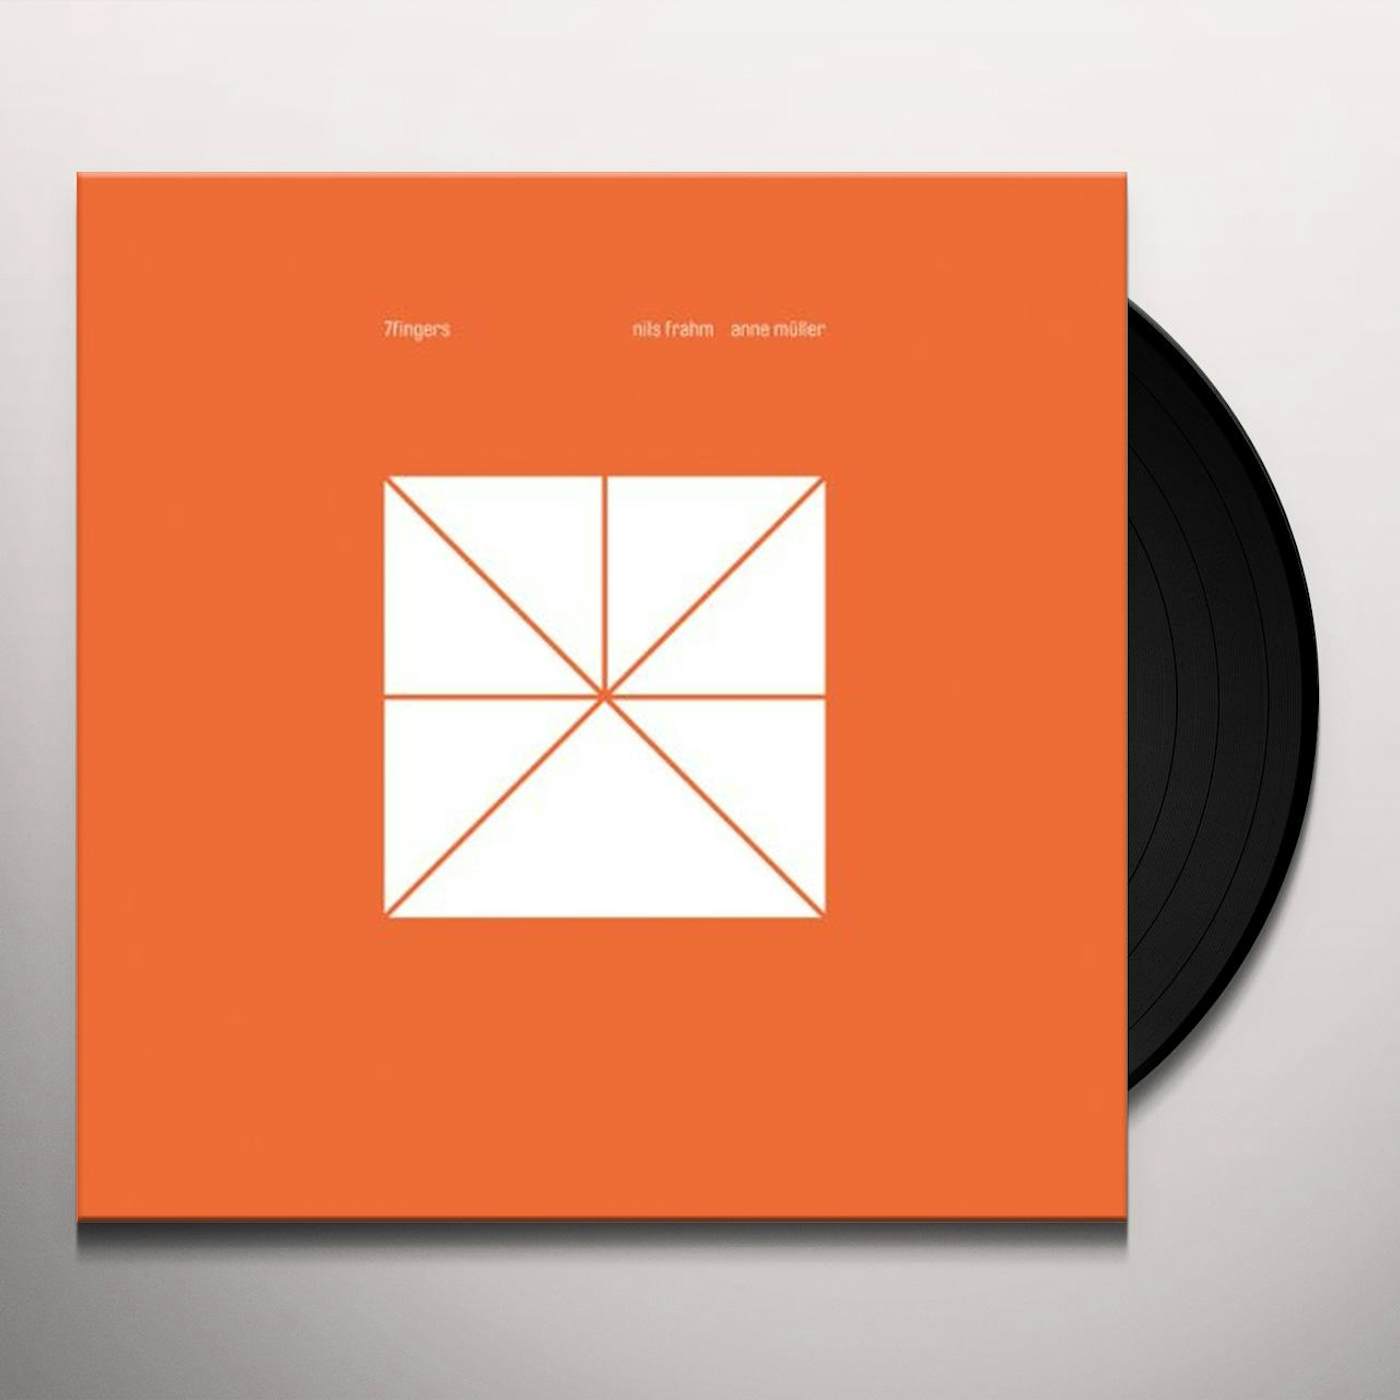 Nils Frahm And Anne Müller 7 FINGERS Vinyl Record